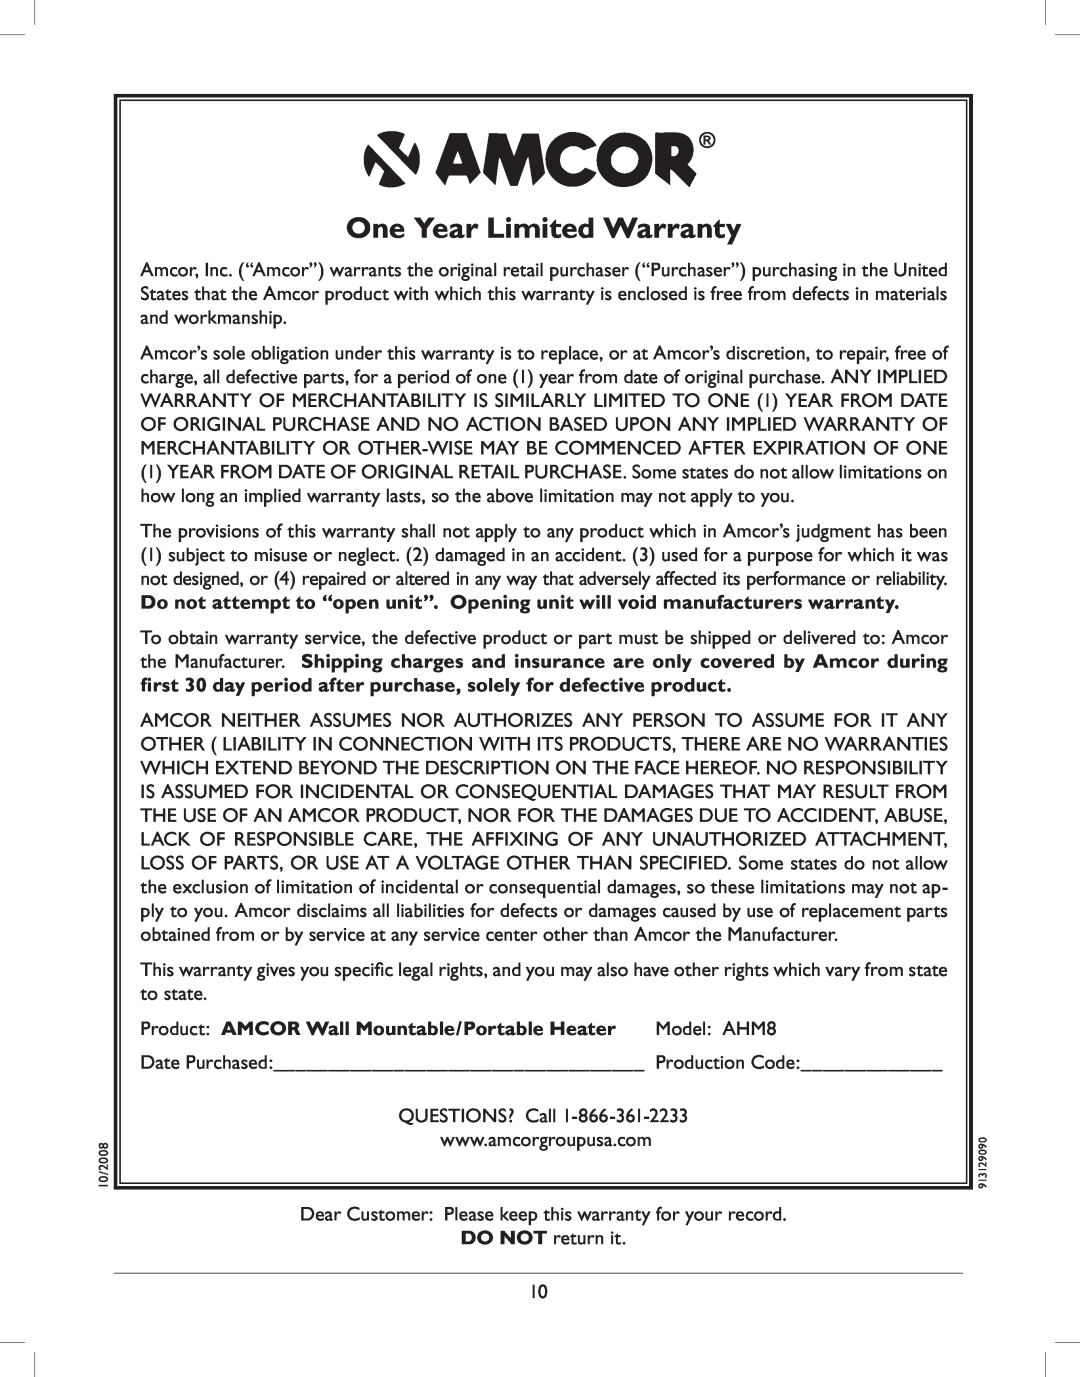 Amcor AMH8 owner manual One Year Limited Warranty 